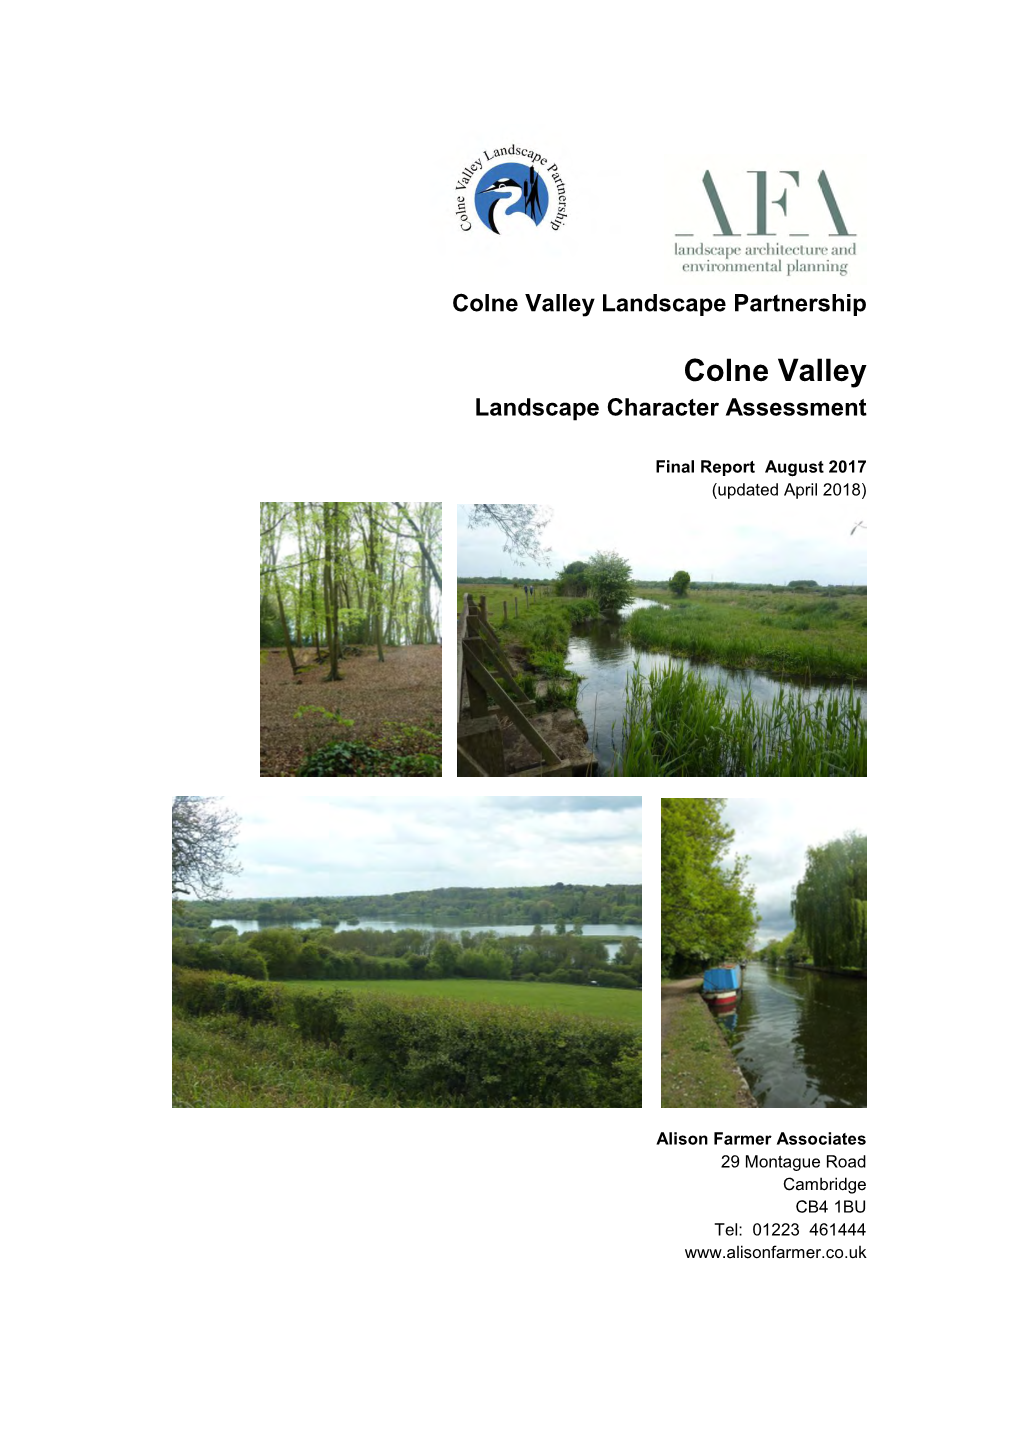 Colne Valley Landscape Character Assessment, Updated April 2018